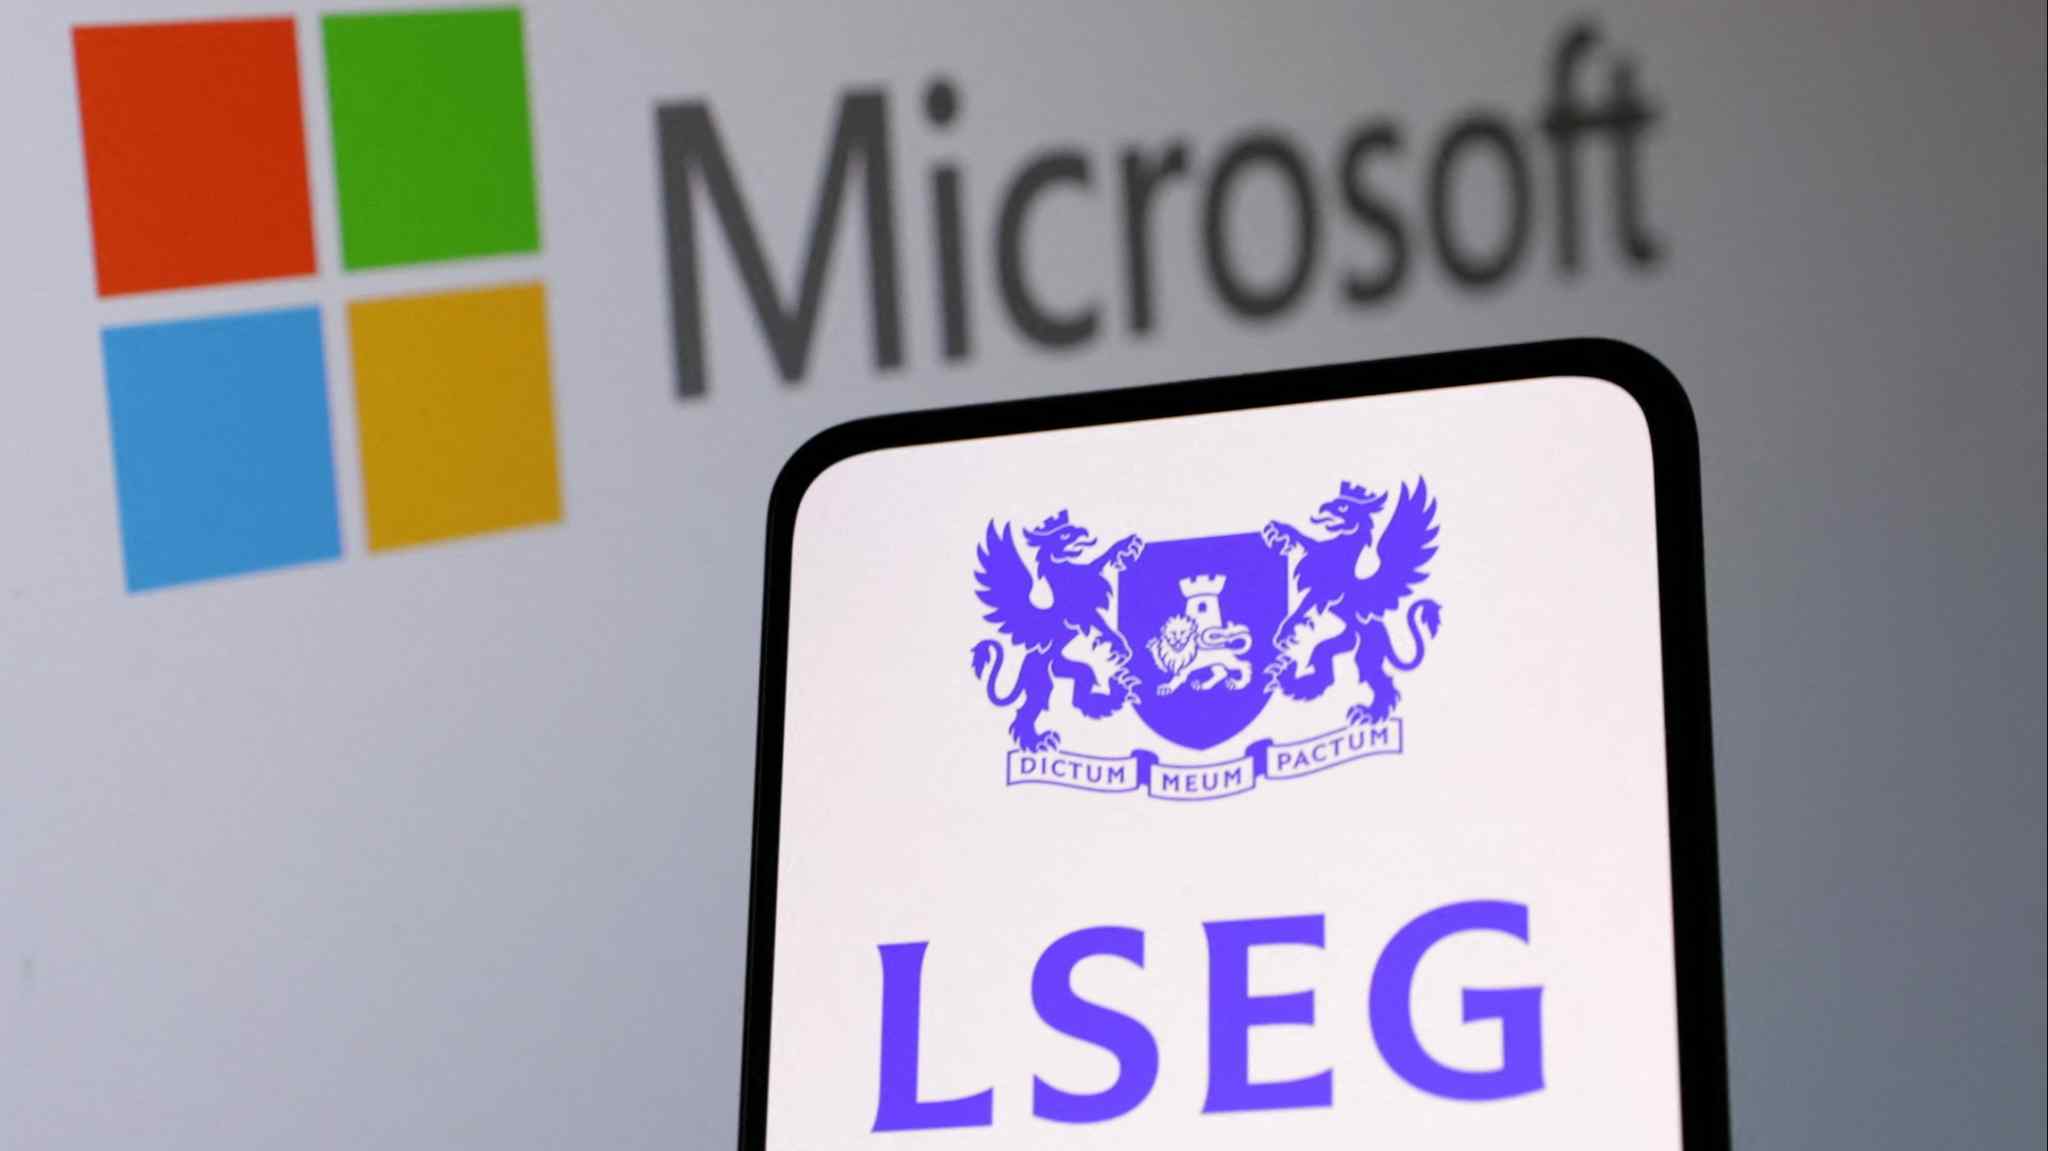 LSEG teams up with Microsoft to develop AI models